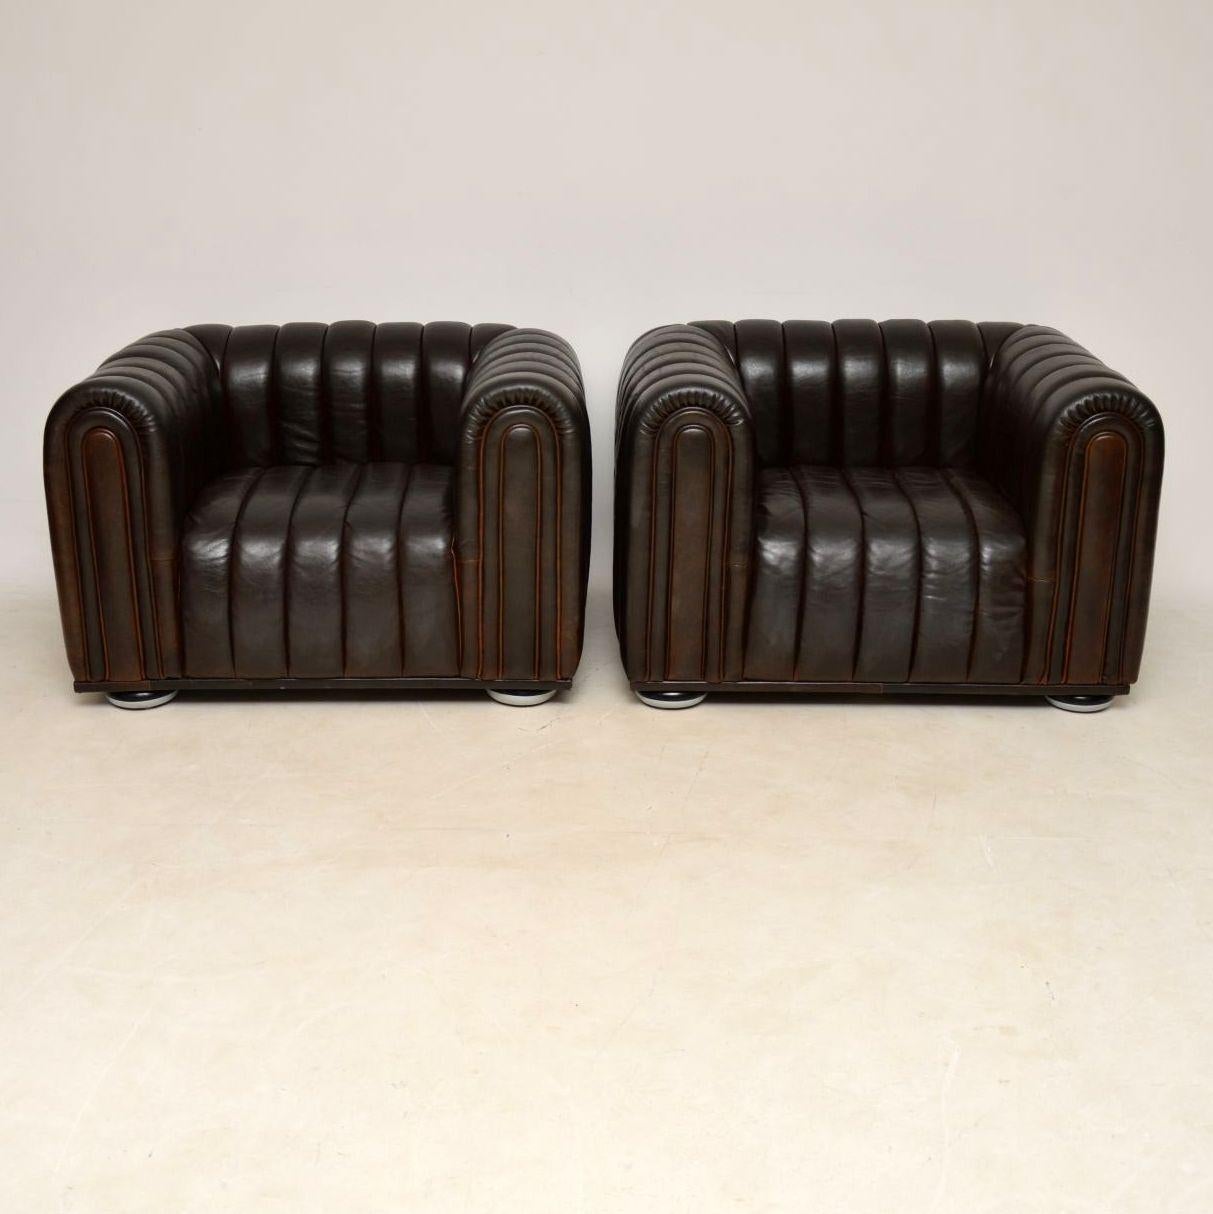 A beautiful and iconic pair of armchairs, these were designed by Josef Hoffman in 1910. This pair in brown leather date from the late 20th century, they are in great condition with only some extremely minor wear here and there, mostly around the top